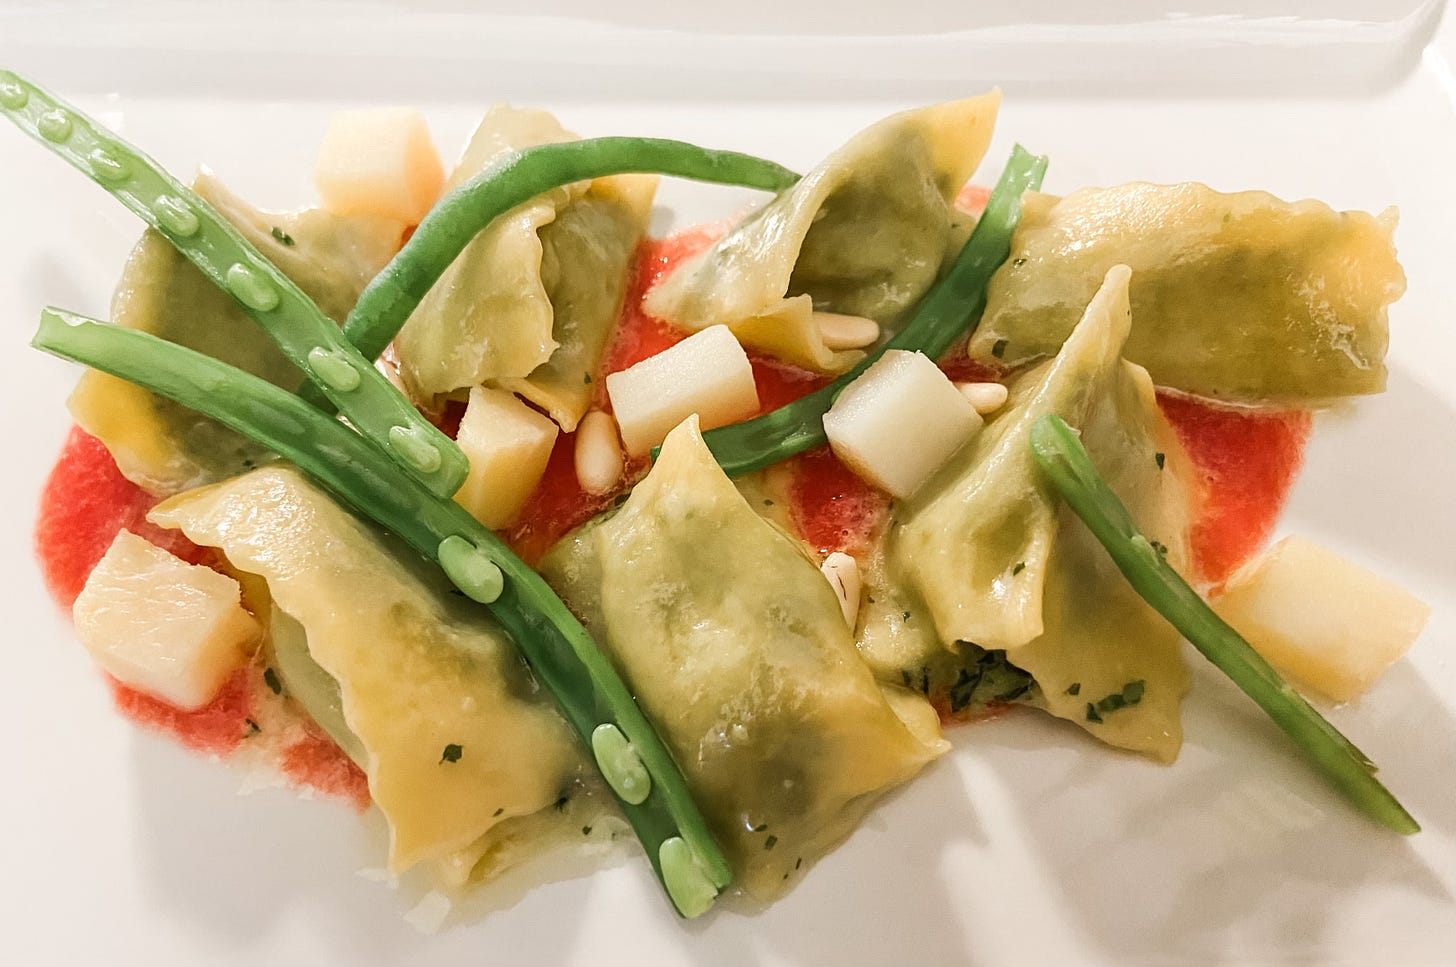 veggie ravioli with beans and tomato sauce on white plate